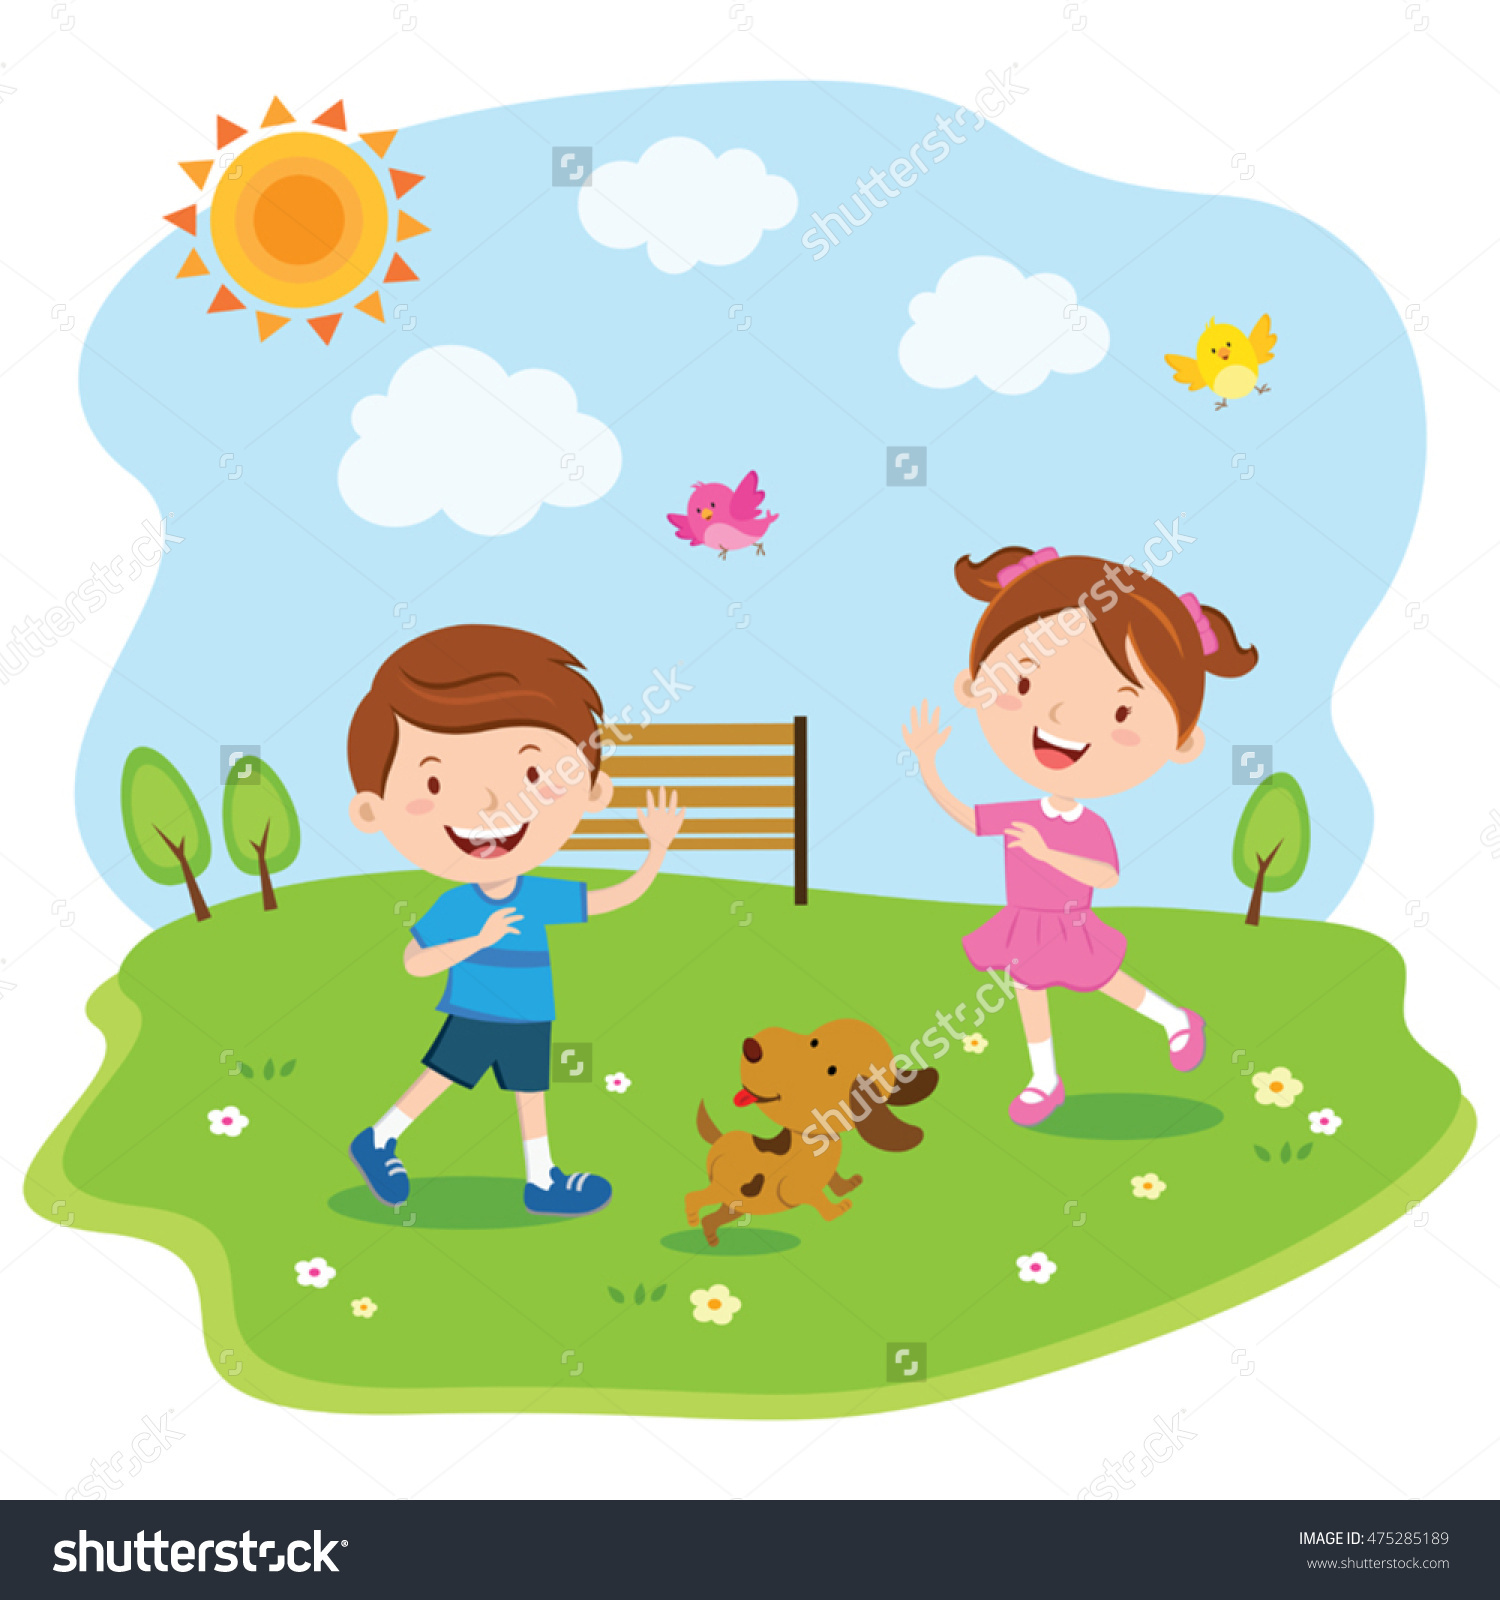 outdoor play clipart - photo #38